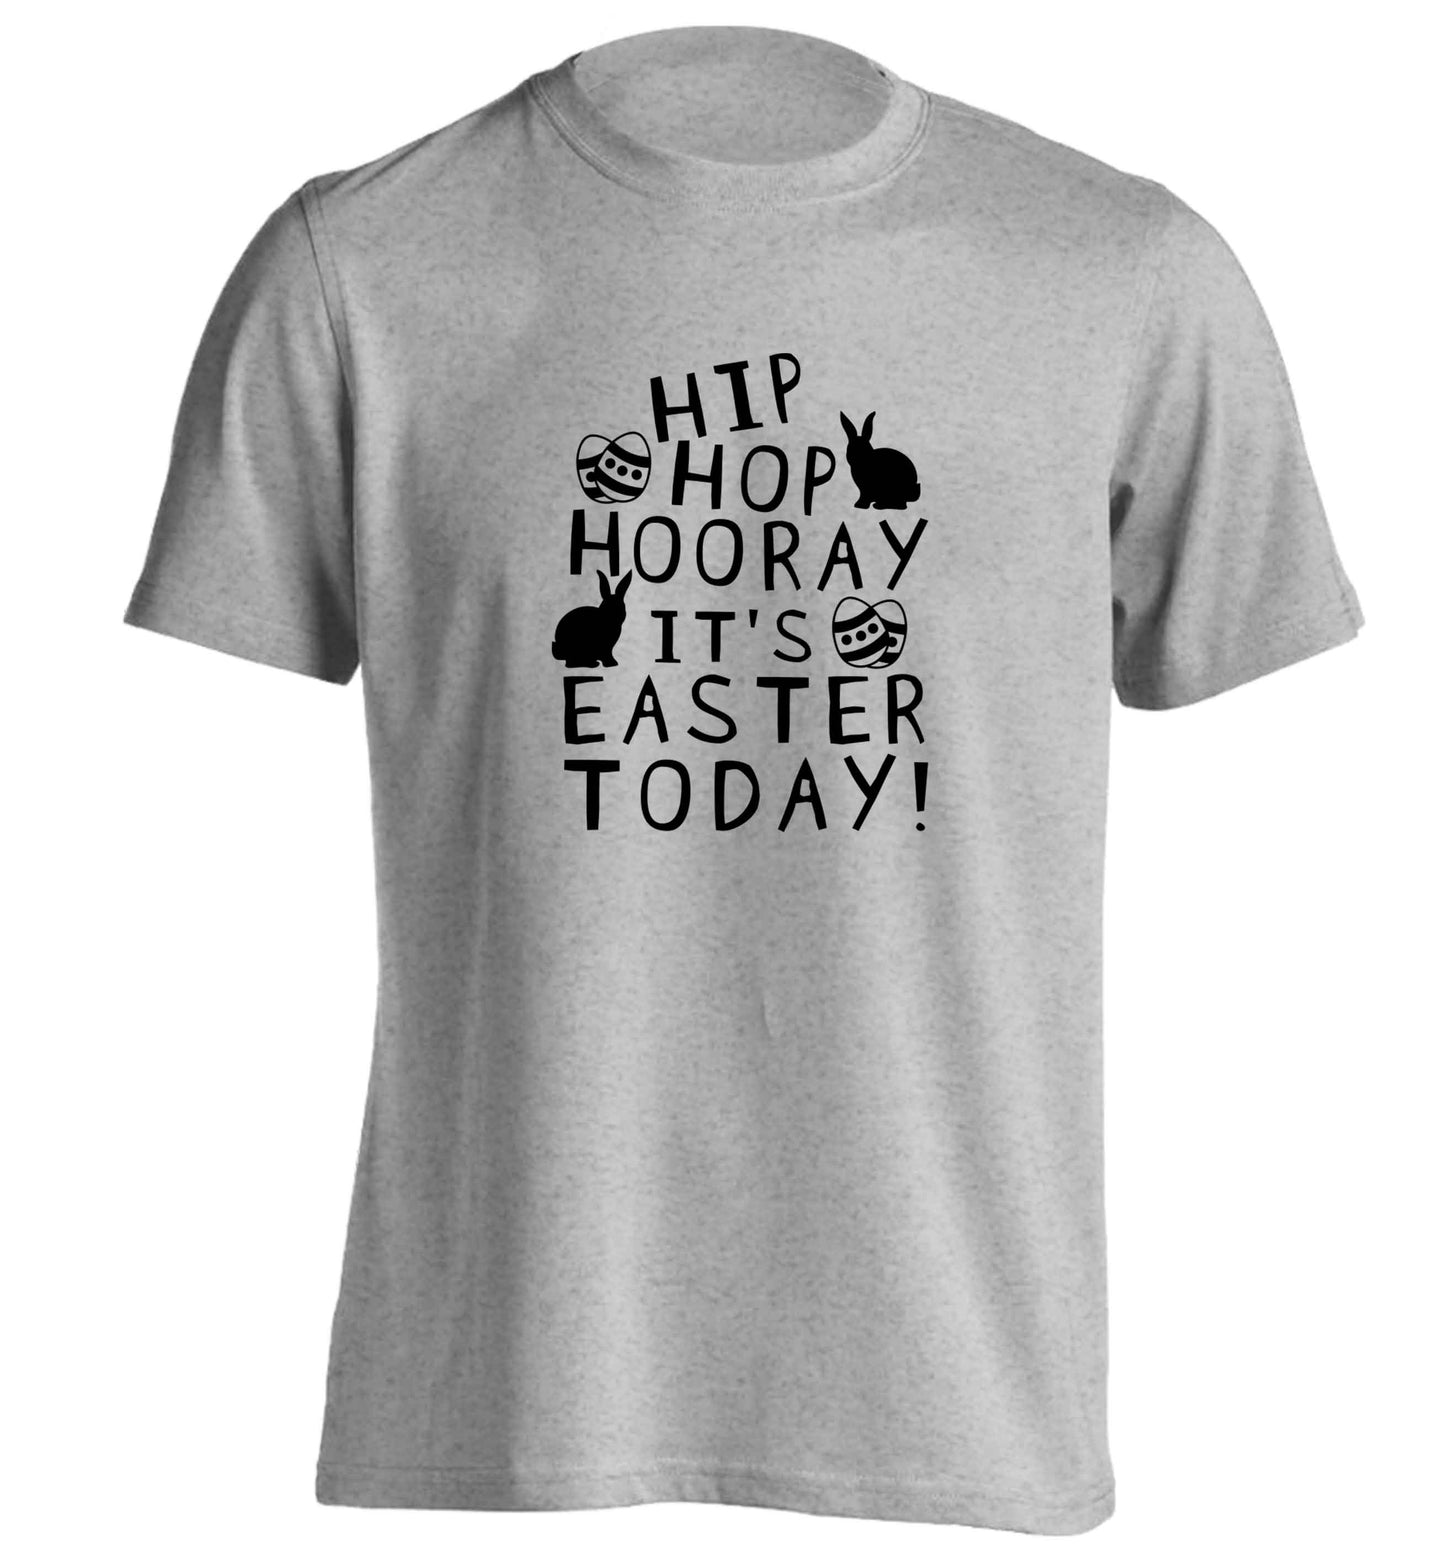 Hip hip hooray it's Easter today! adults unisex grey Tshirt 2XL